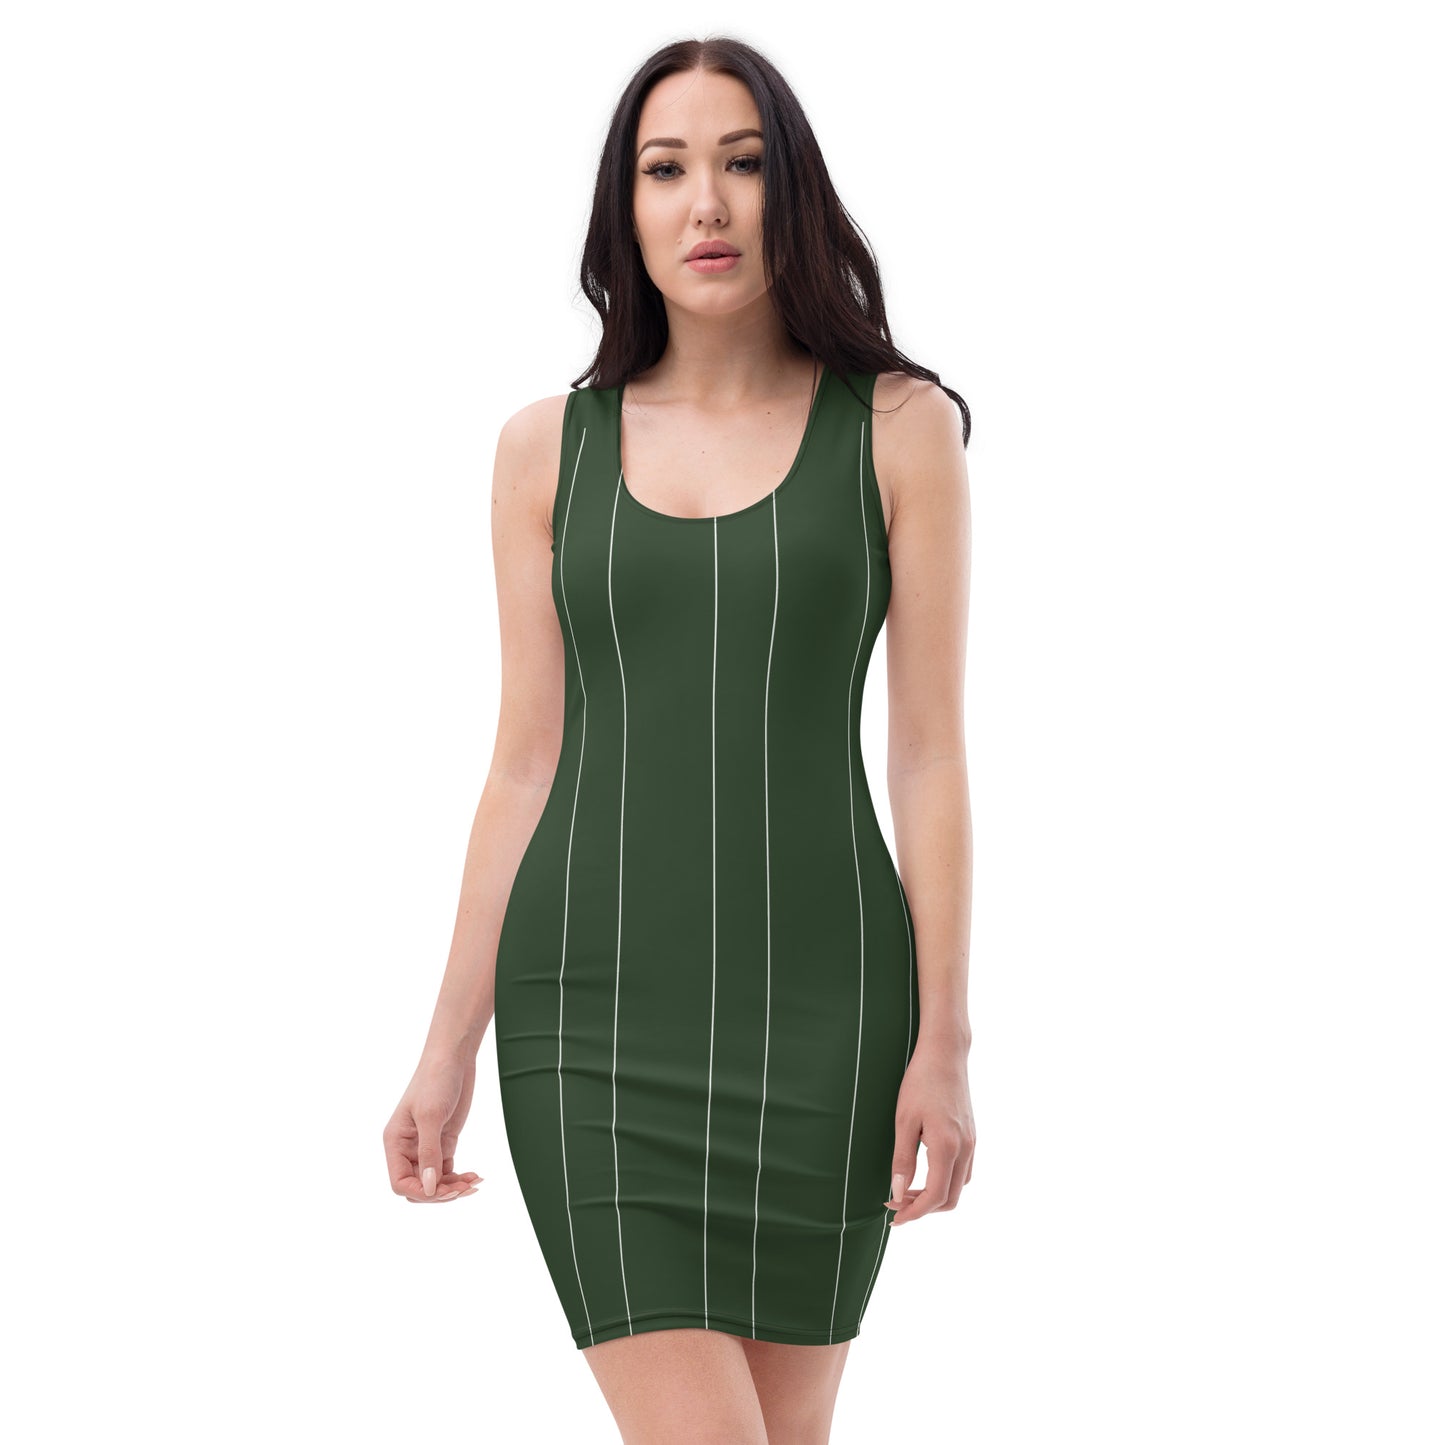 Women Get the Perfect Look with Women's green Cut & Sew Mini Skirt Dress. Versatile and Stylish, Ideal for Any Occasion. Shop Now!